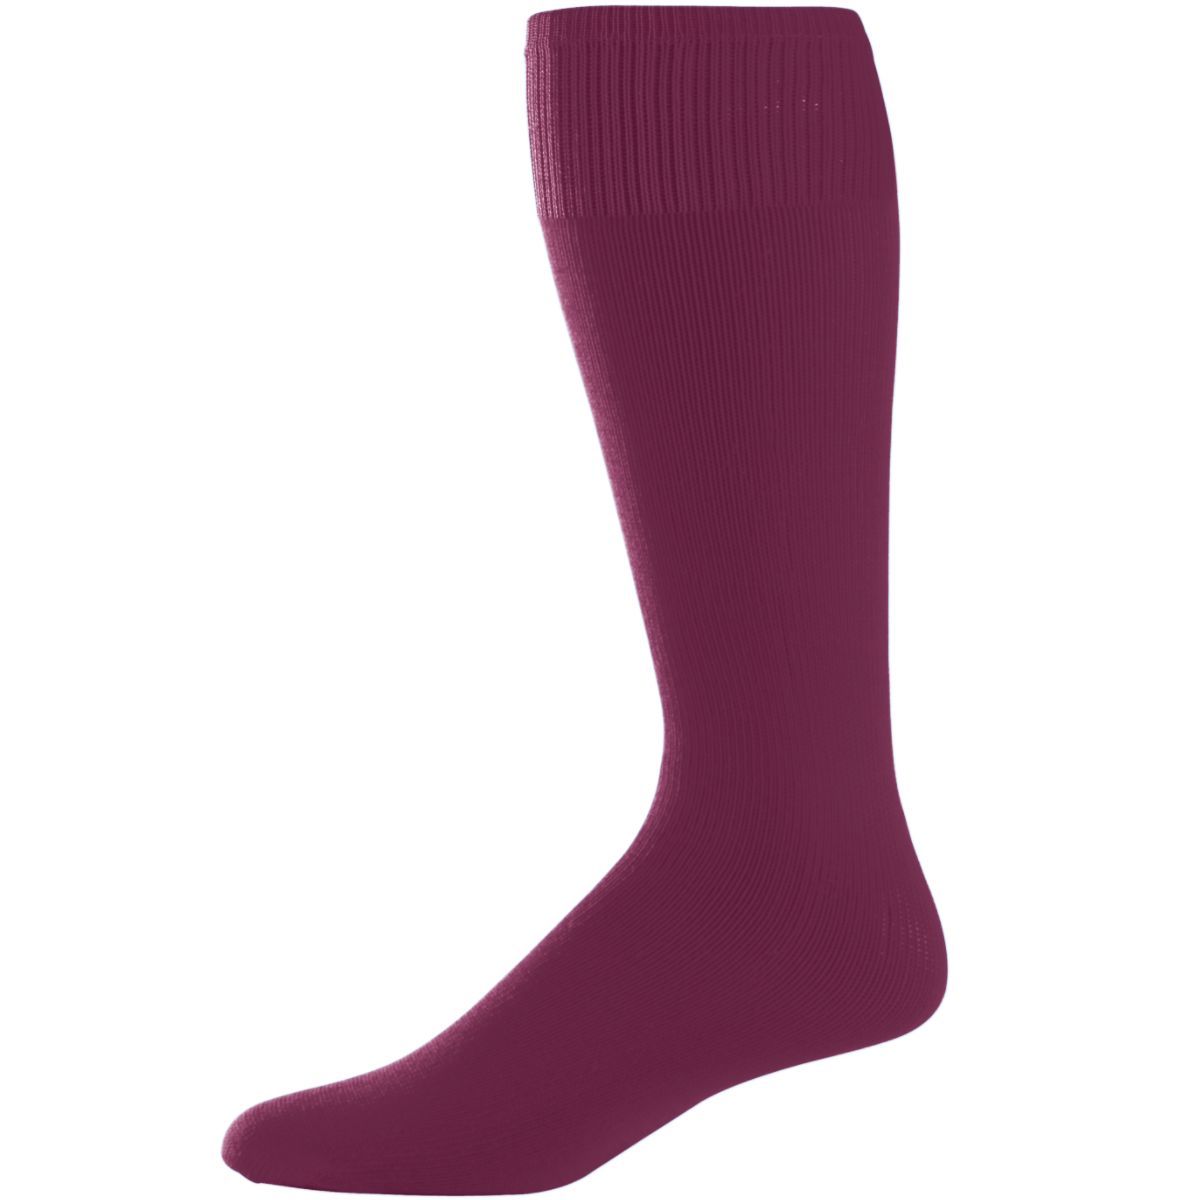 Augusta Sportswear Game Socks in Maroon  -Part of the Accessories, Augusta-Products, Accessories-Socks product lines at KanaleyCreations.com